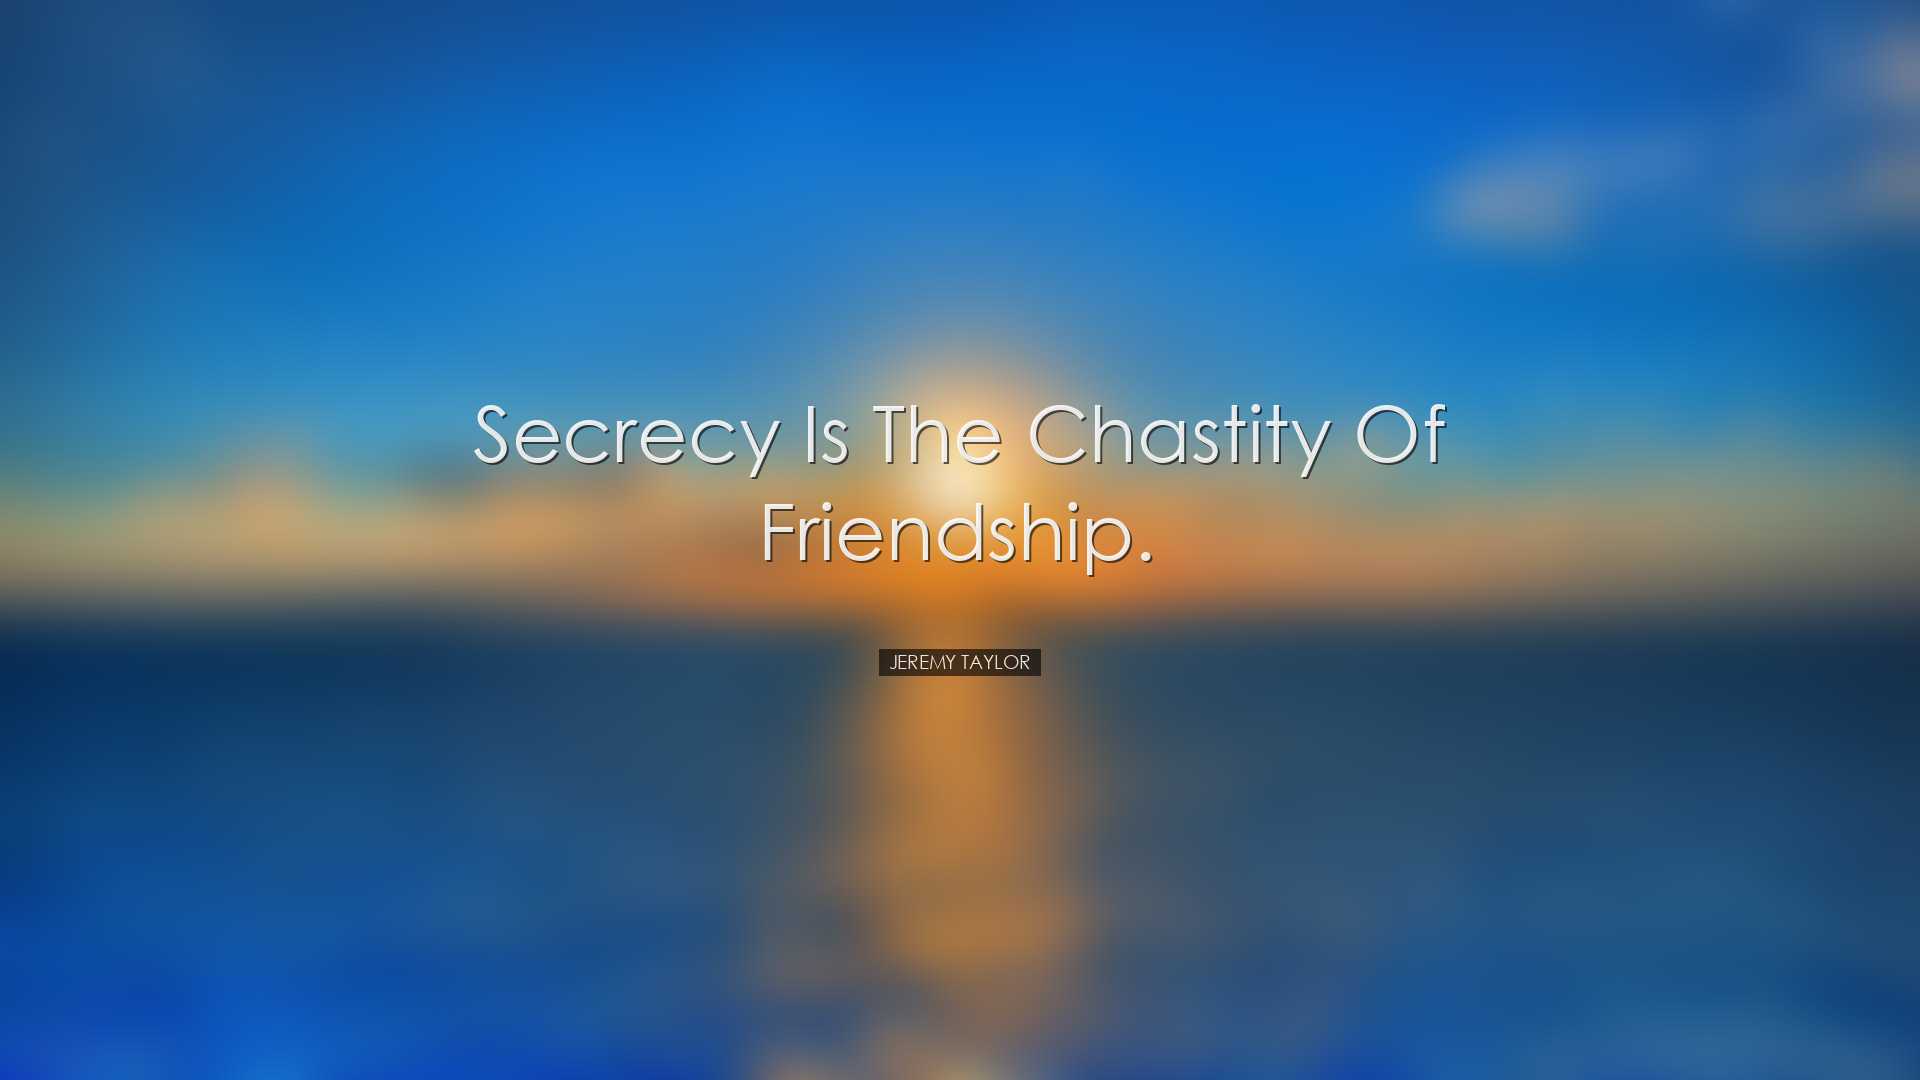 Secrecy is the chastity of friendship. - Jeremy Taylor